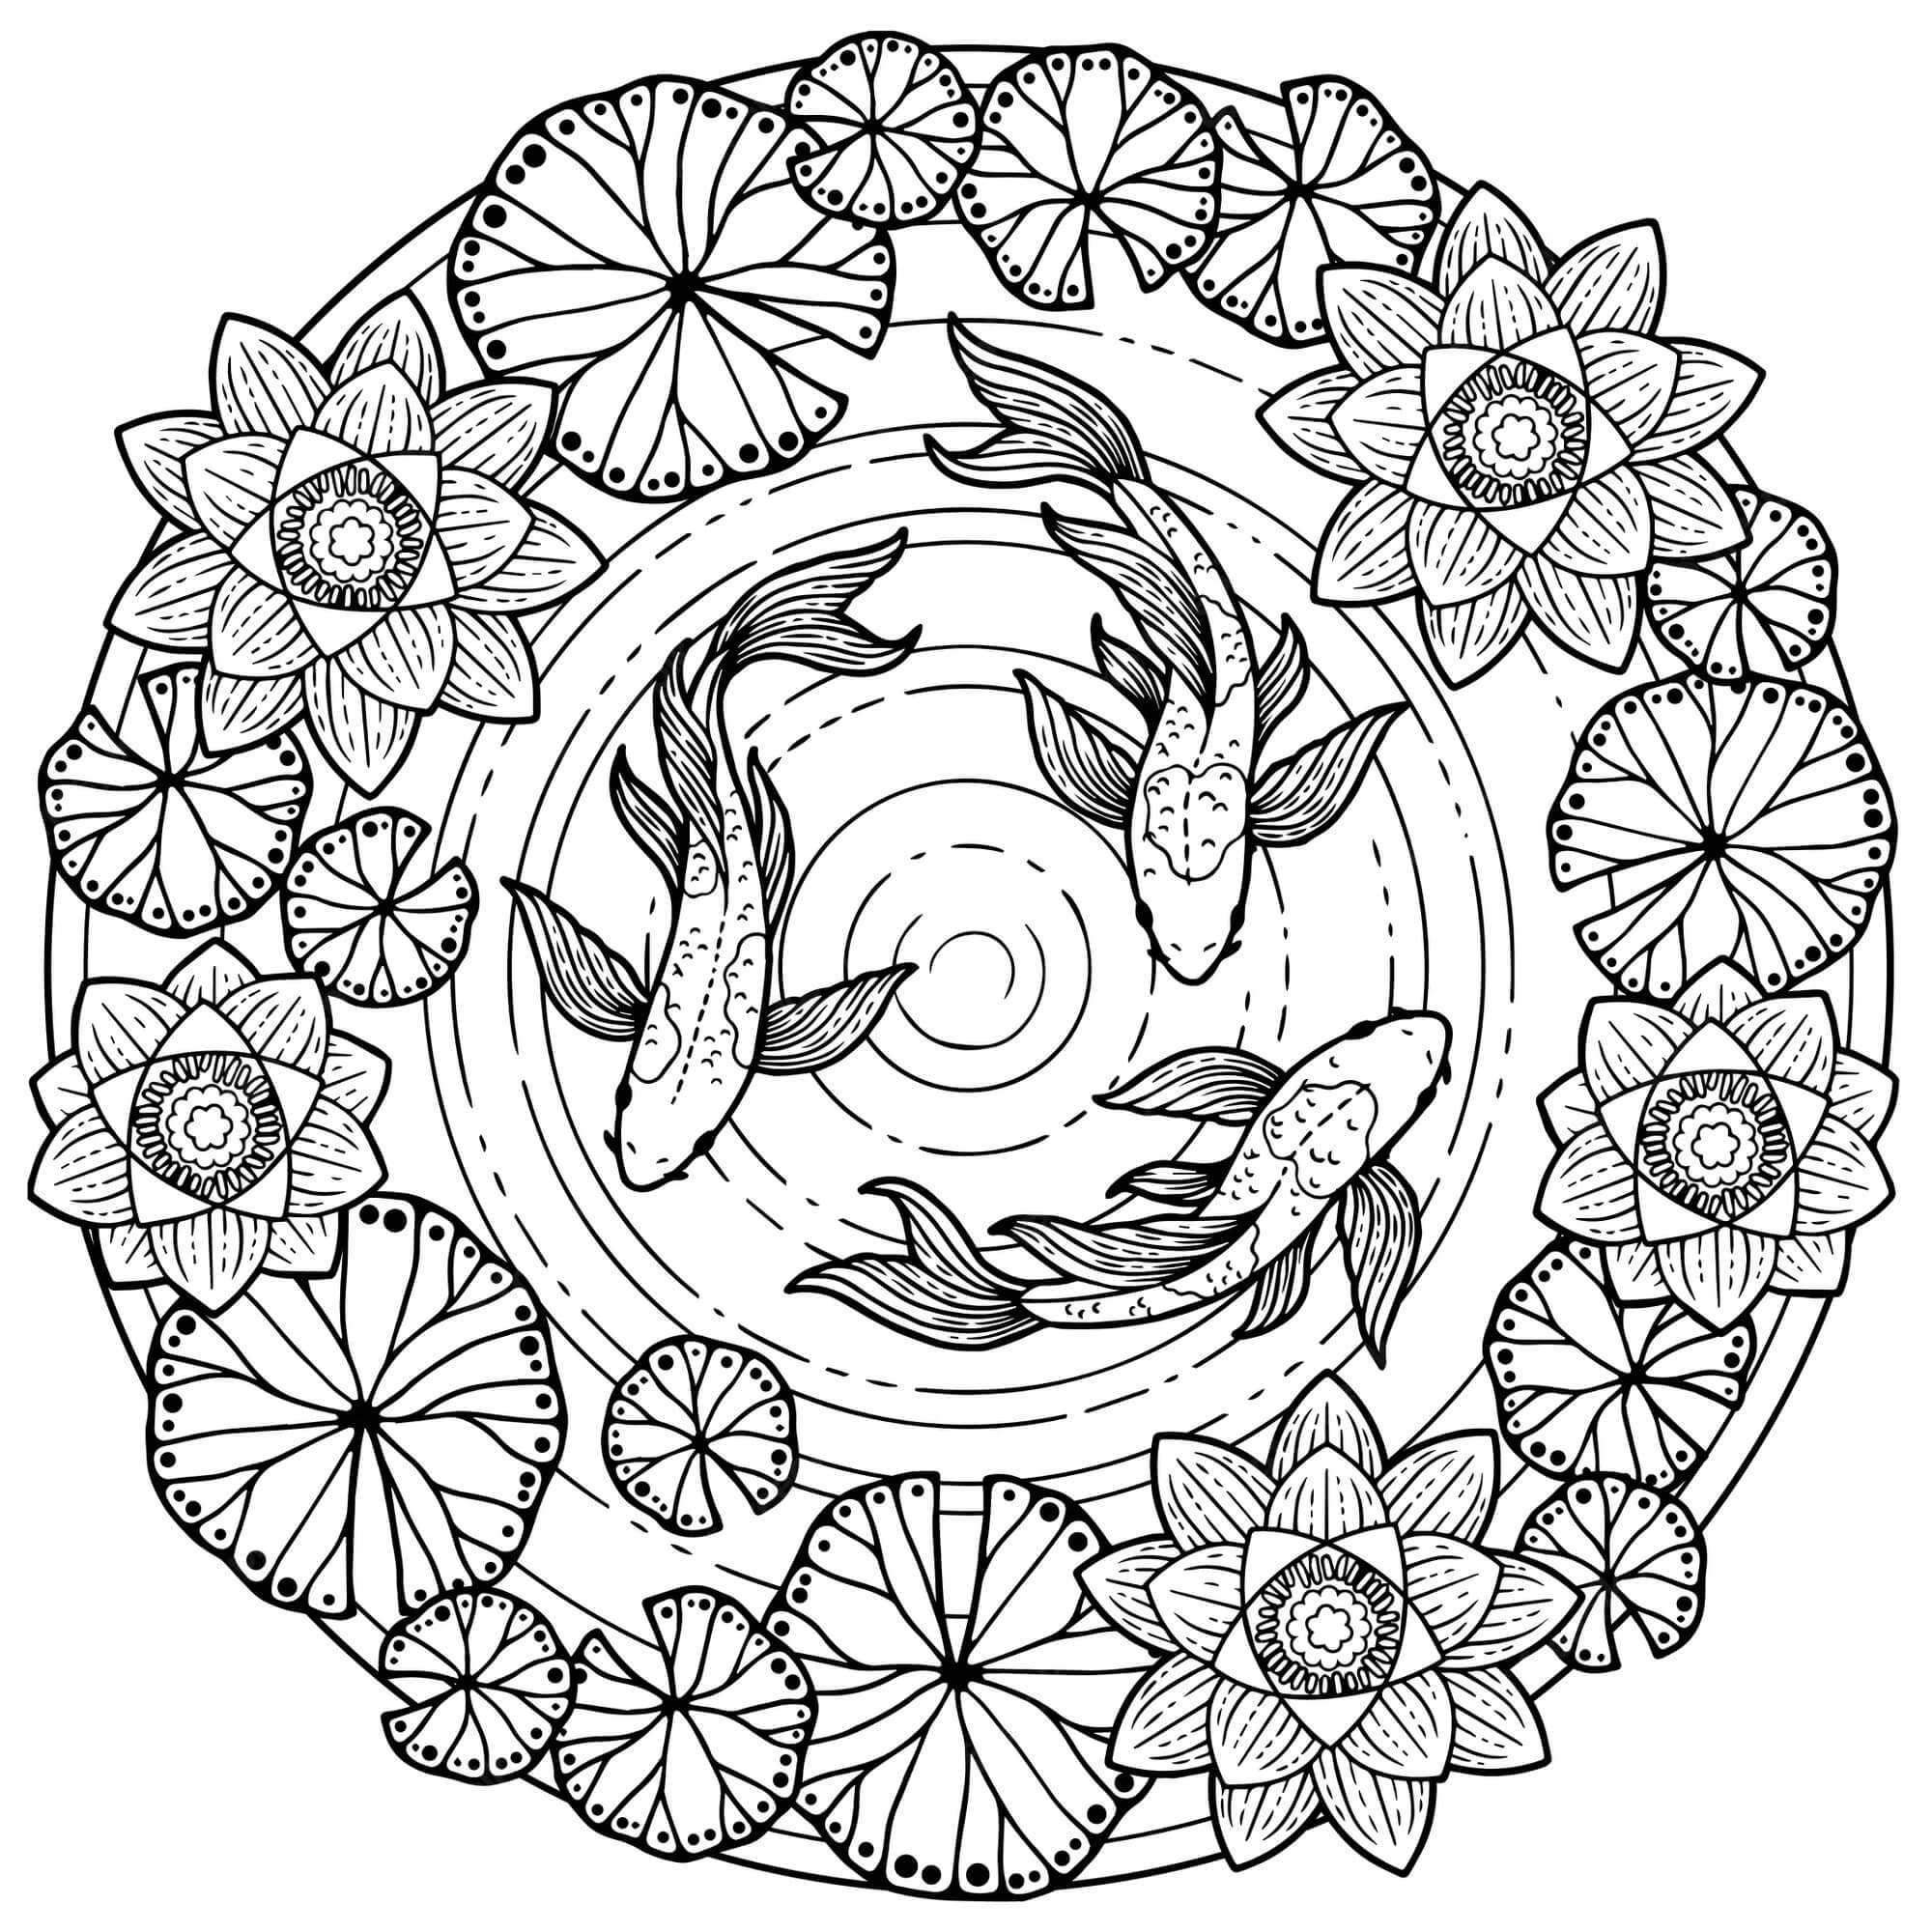 Mandala Flowers and Fishes in Summer Coloring Page Mandala